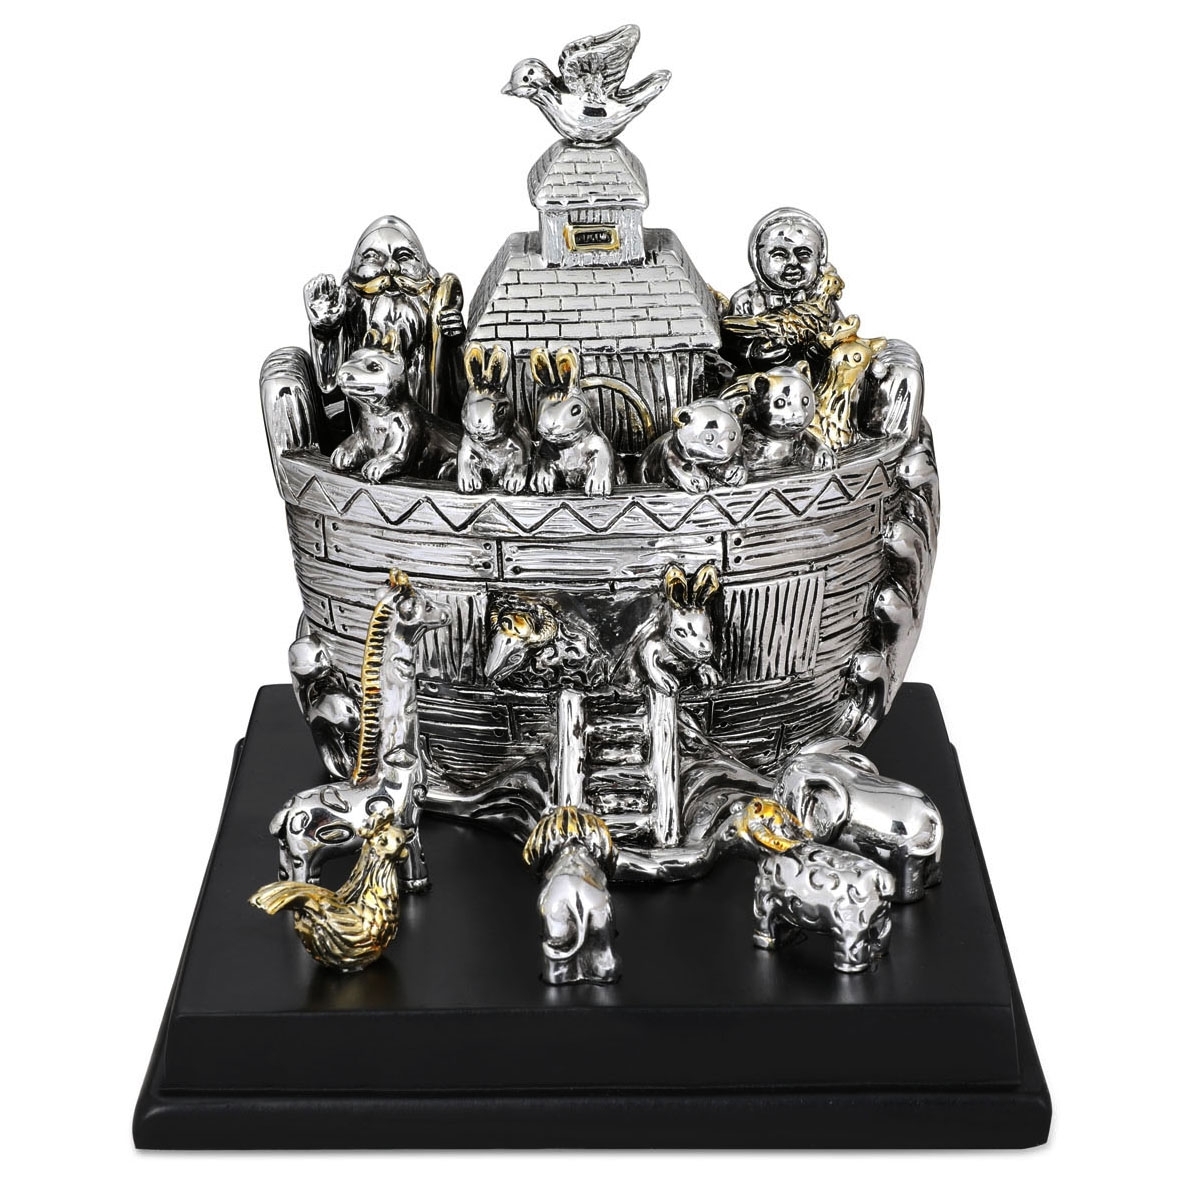 Noah's Ark Silver-Plated Miniature - Large - 1